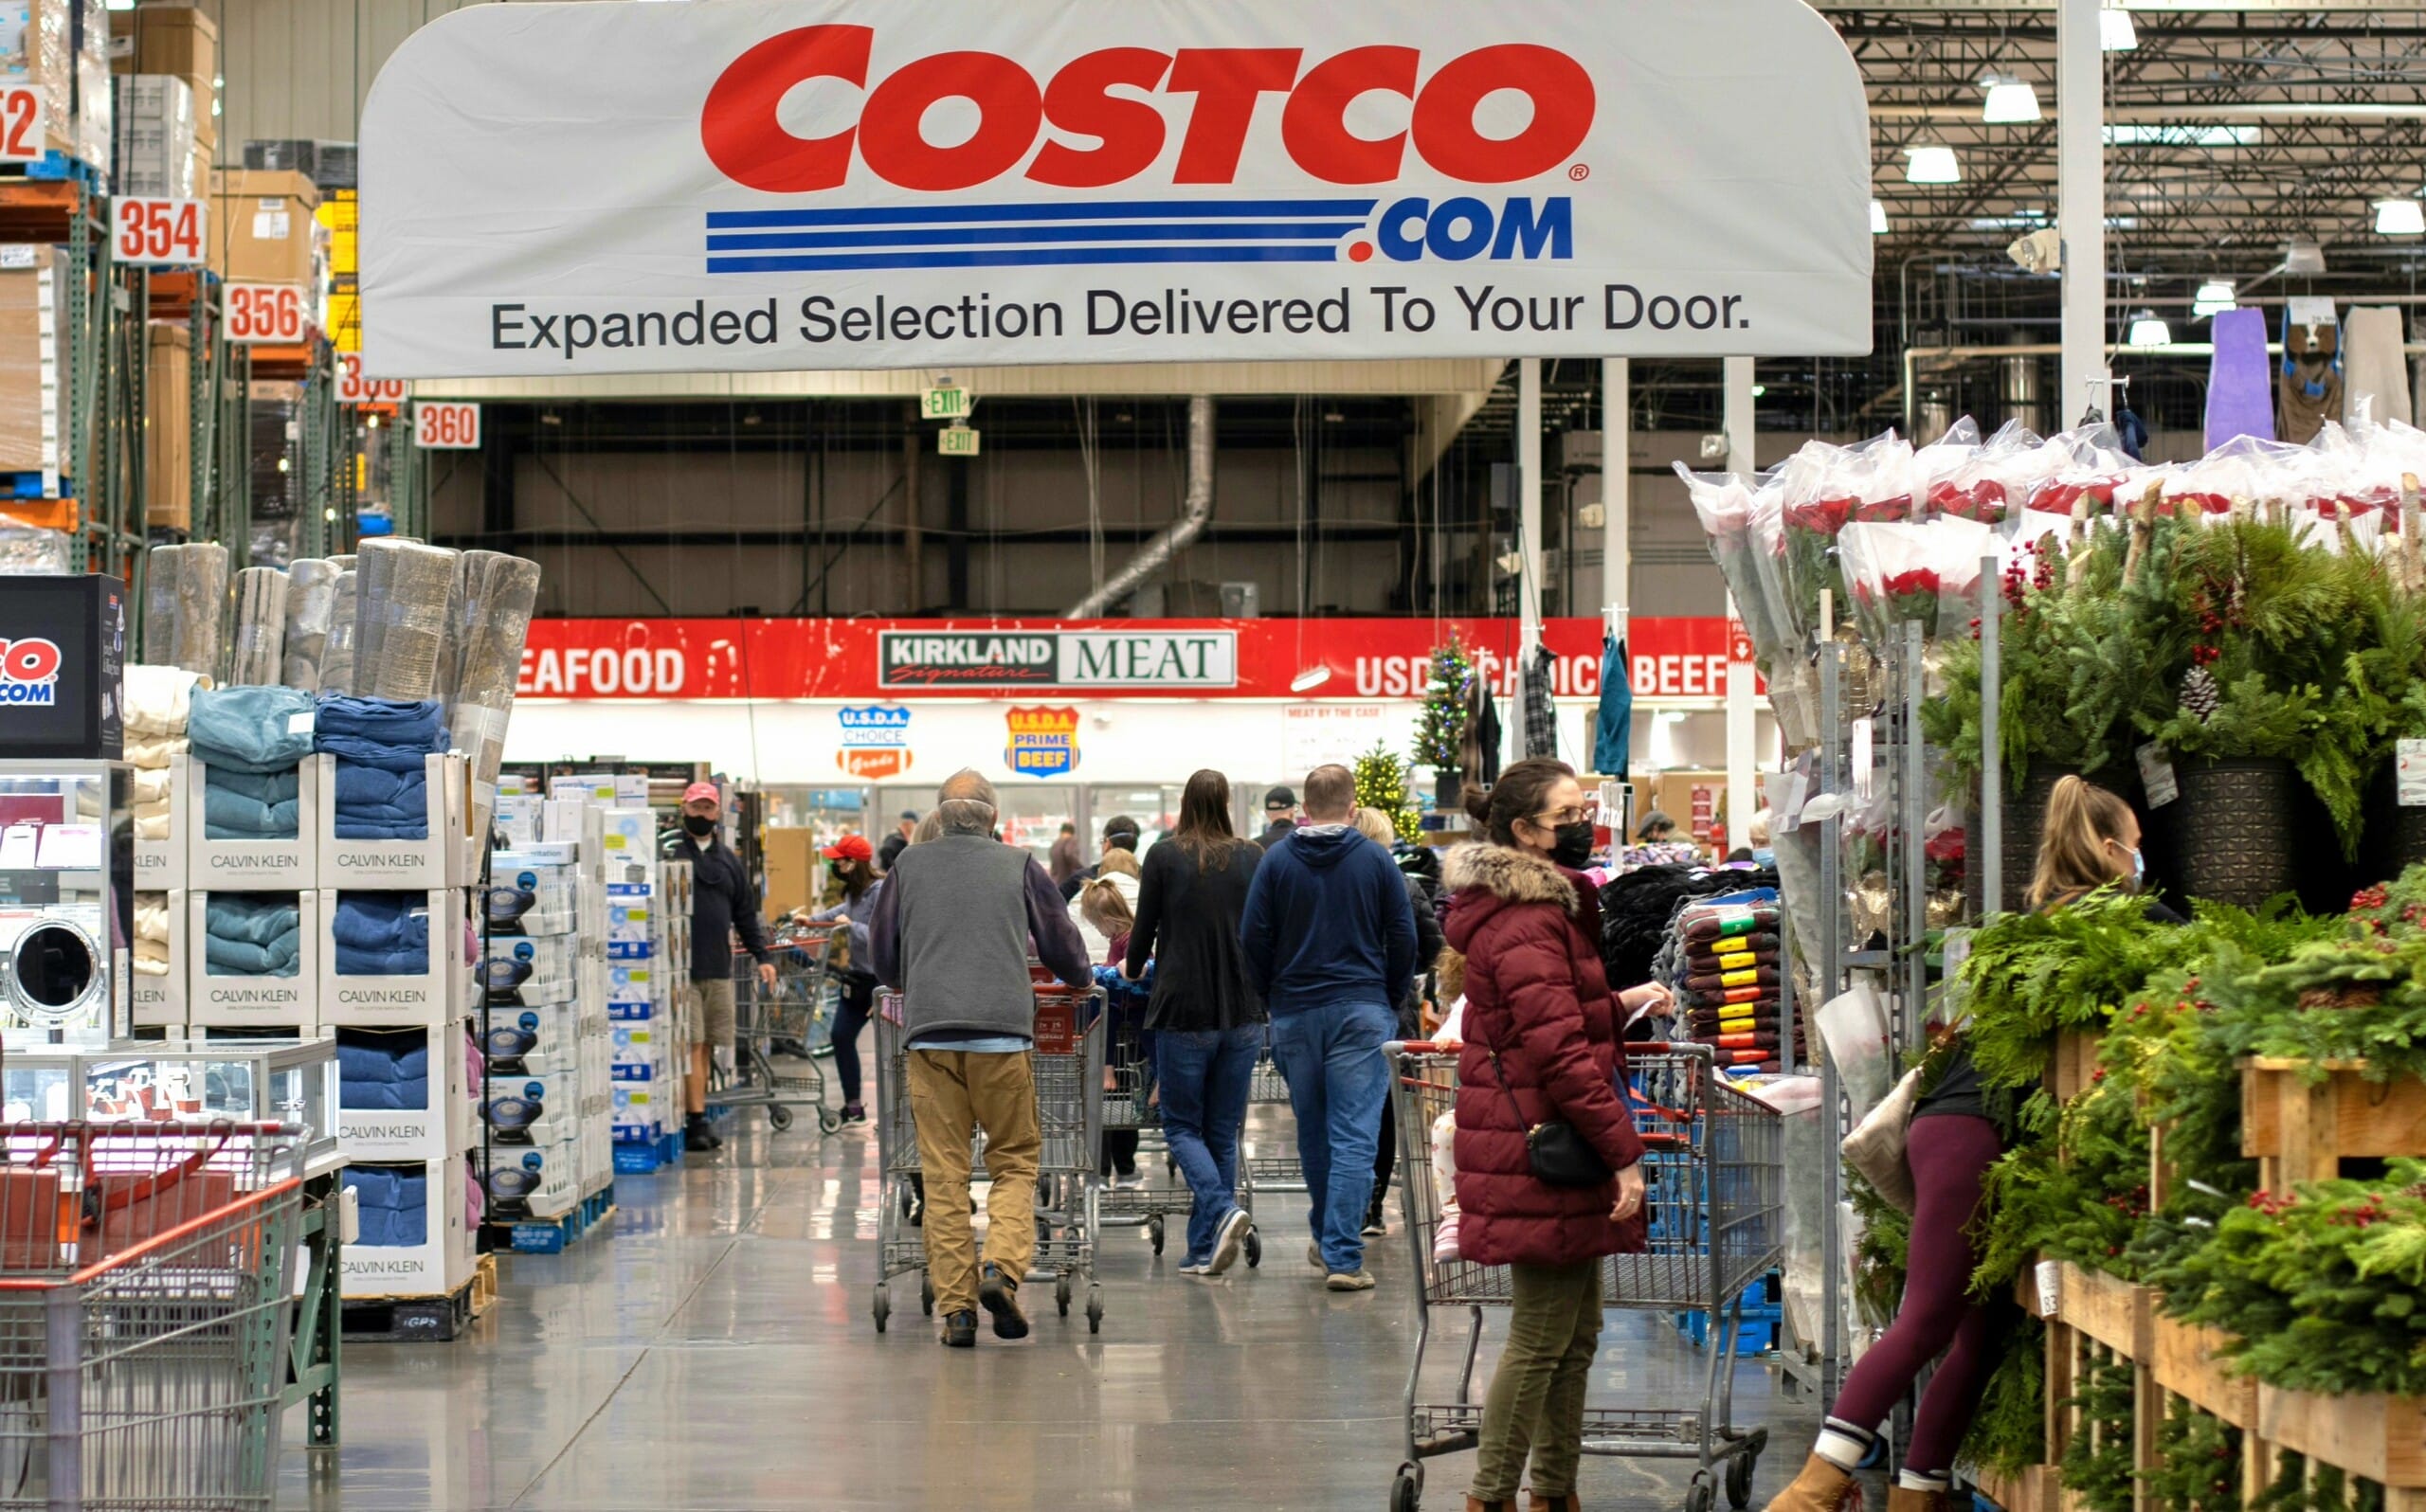 Costco warns of fake email scams